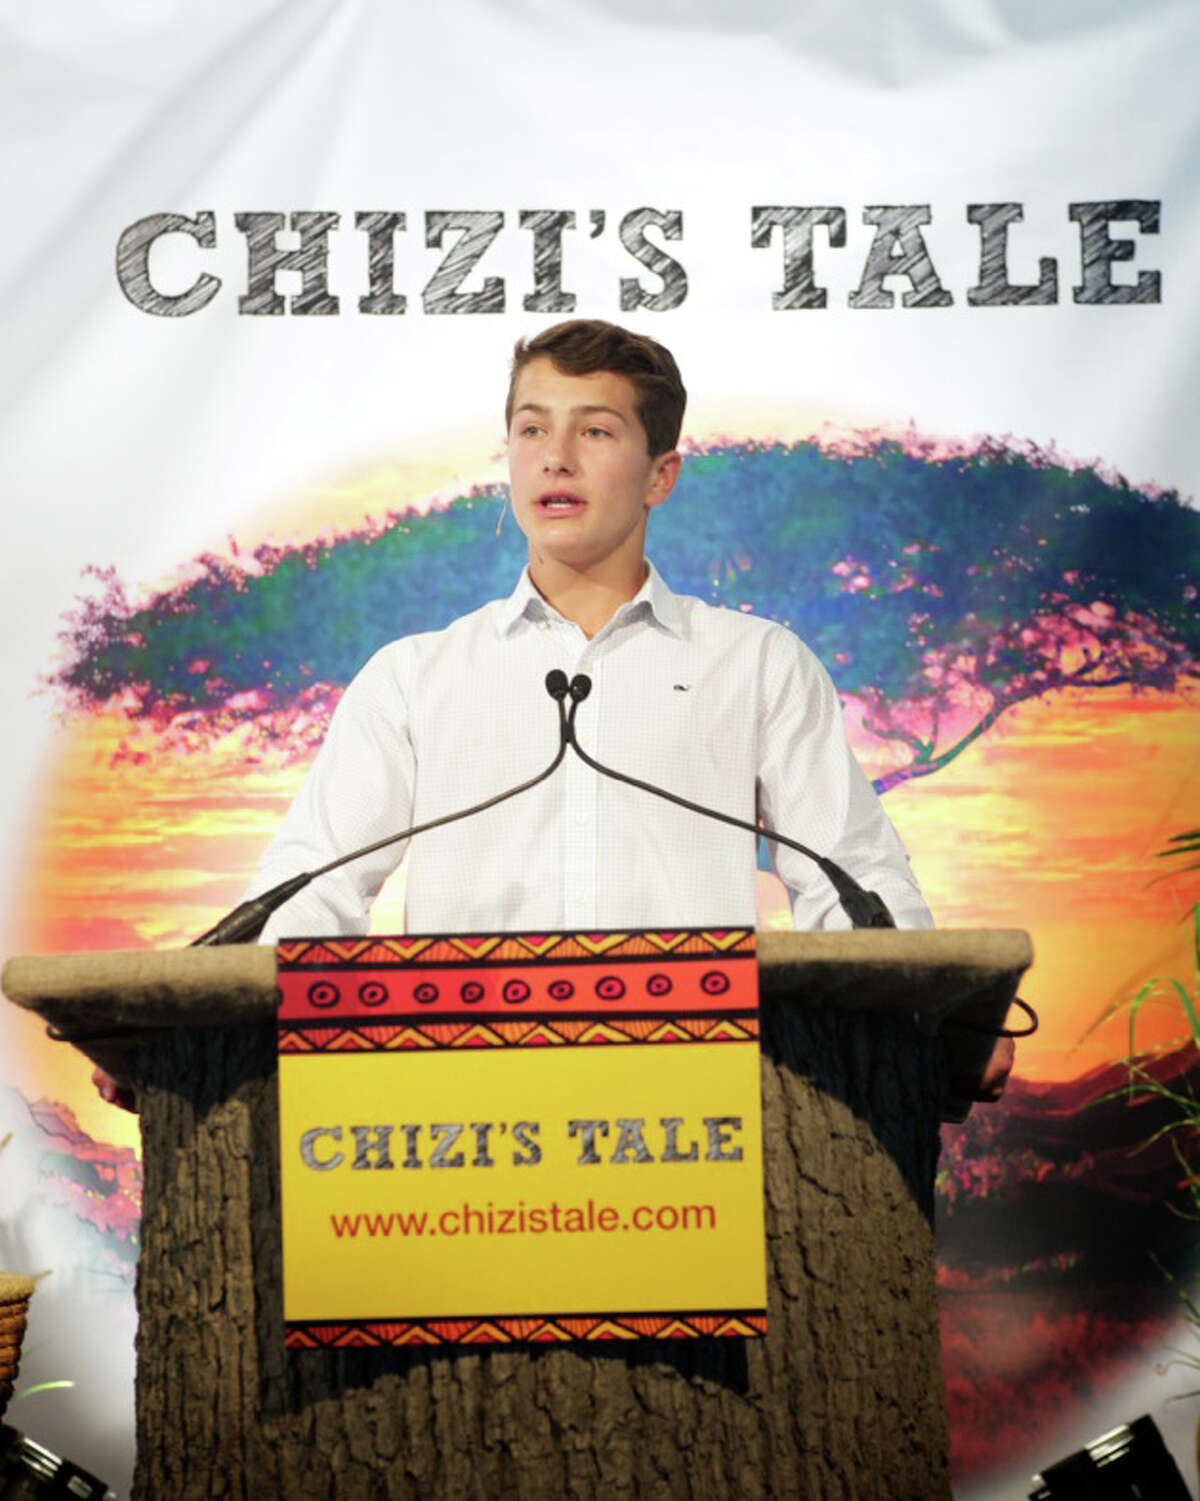 Greenwich's Jack Jones recently published his first children's book, "Chizi's Tale," which tells a true tale of a family's decision to keep an abandoned black rhino in their home. Here, he talks about the project at a book launch in September 2014.